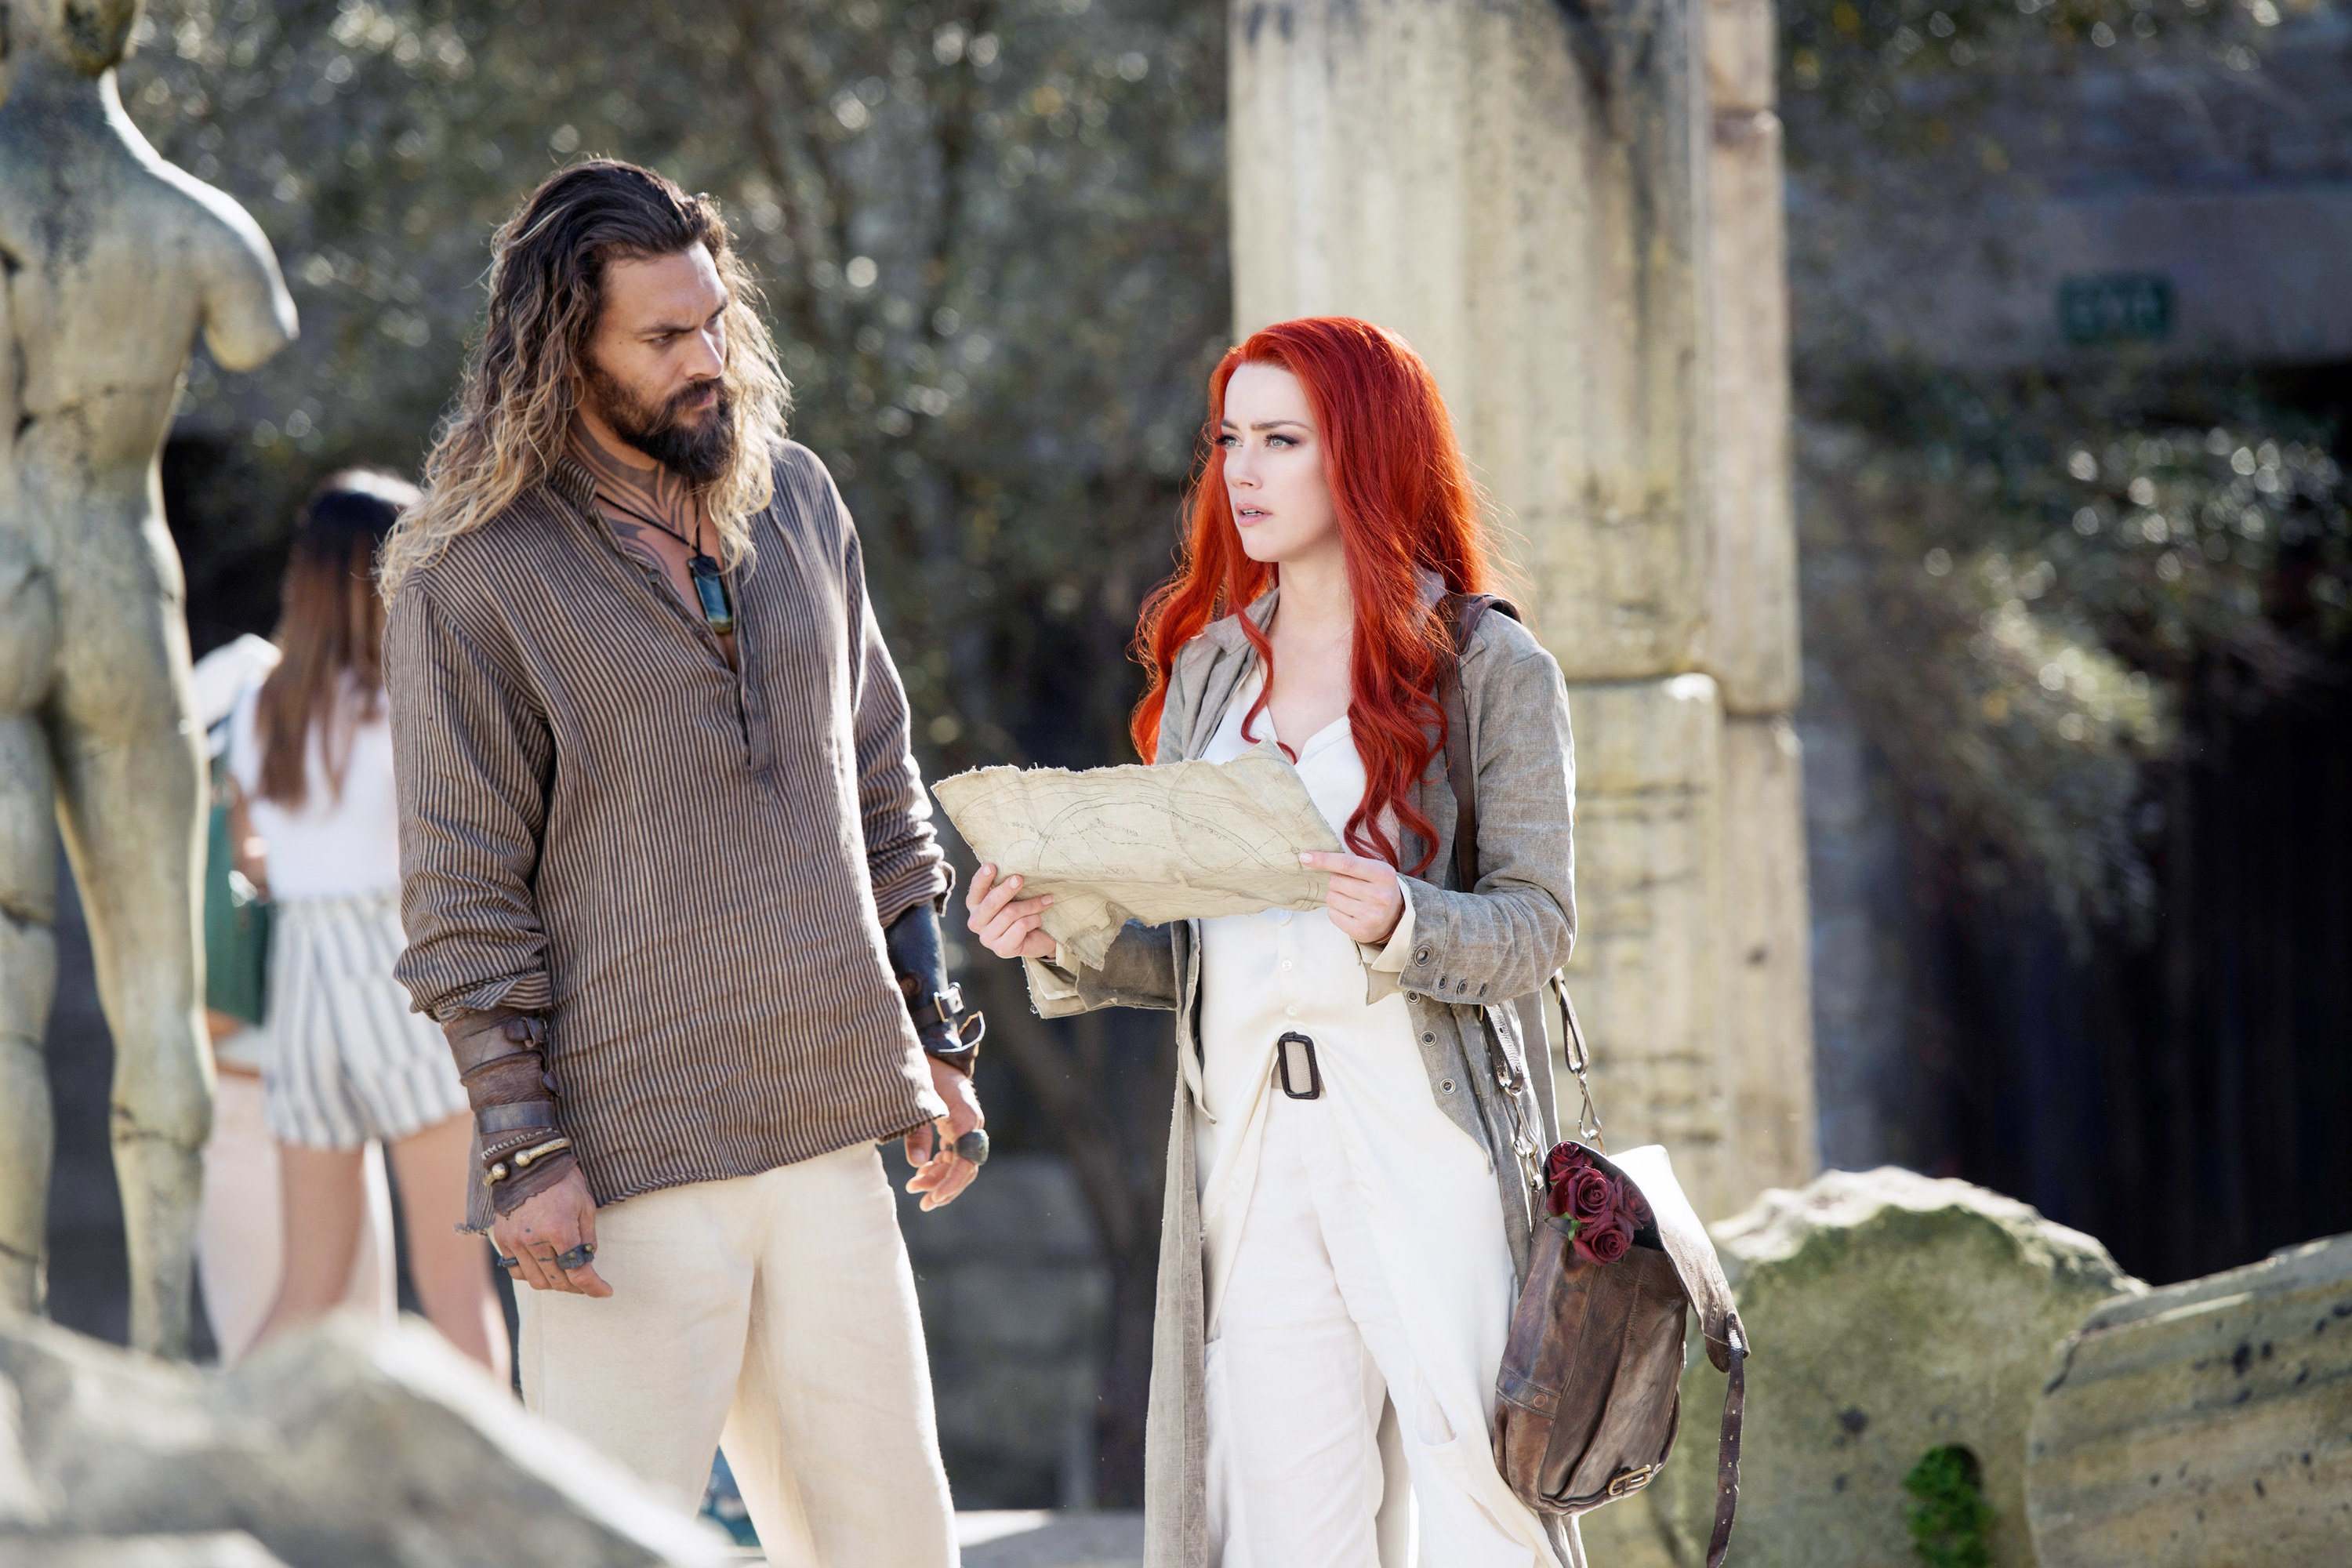 Jason Momoa and Amber Heard standing together